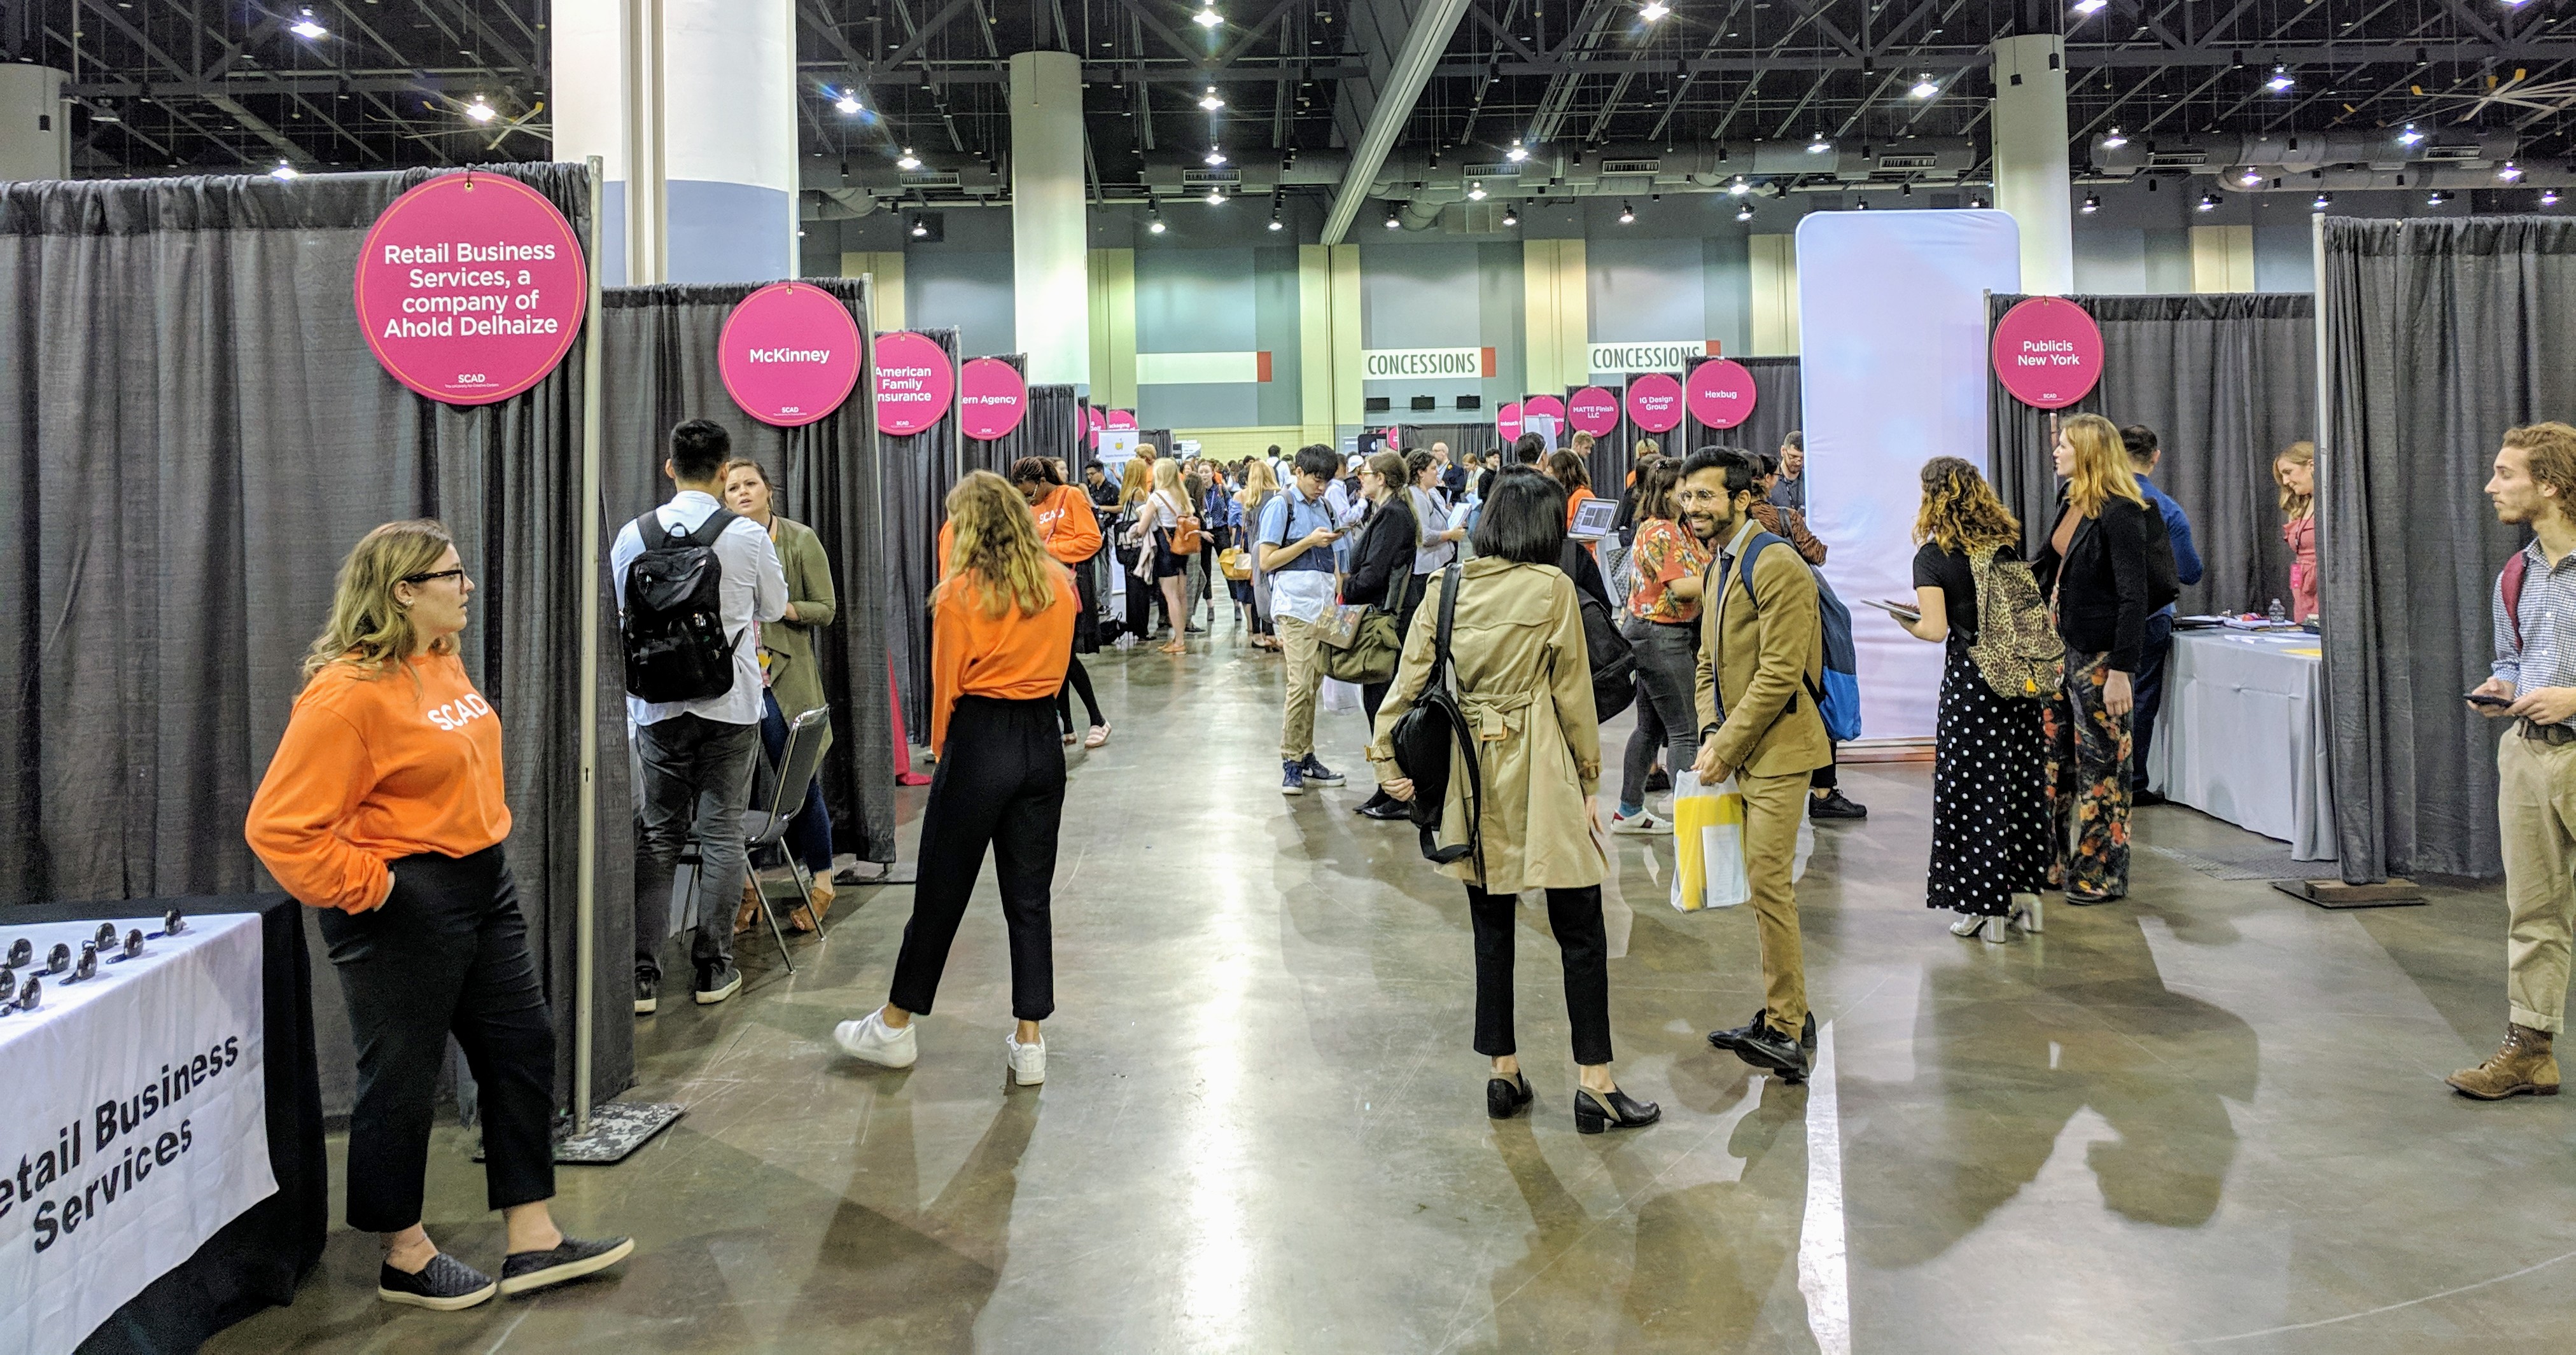 Was the SCAD Career Fair 2019 worth it? The Connector